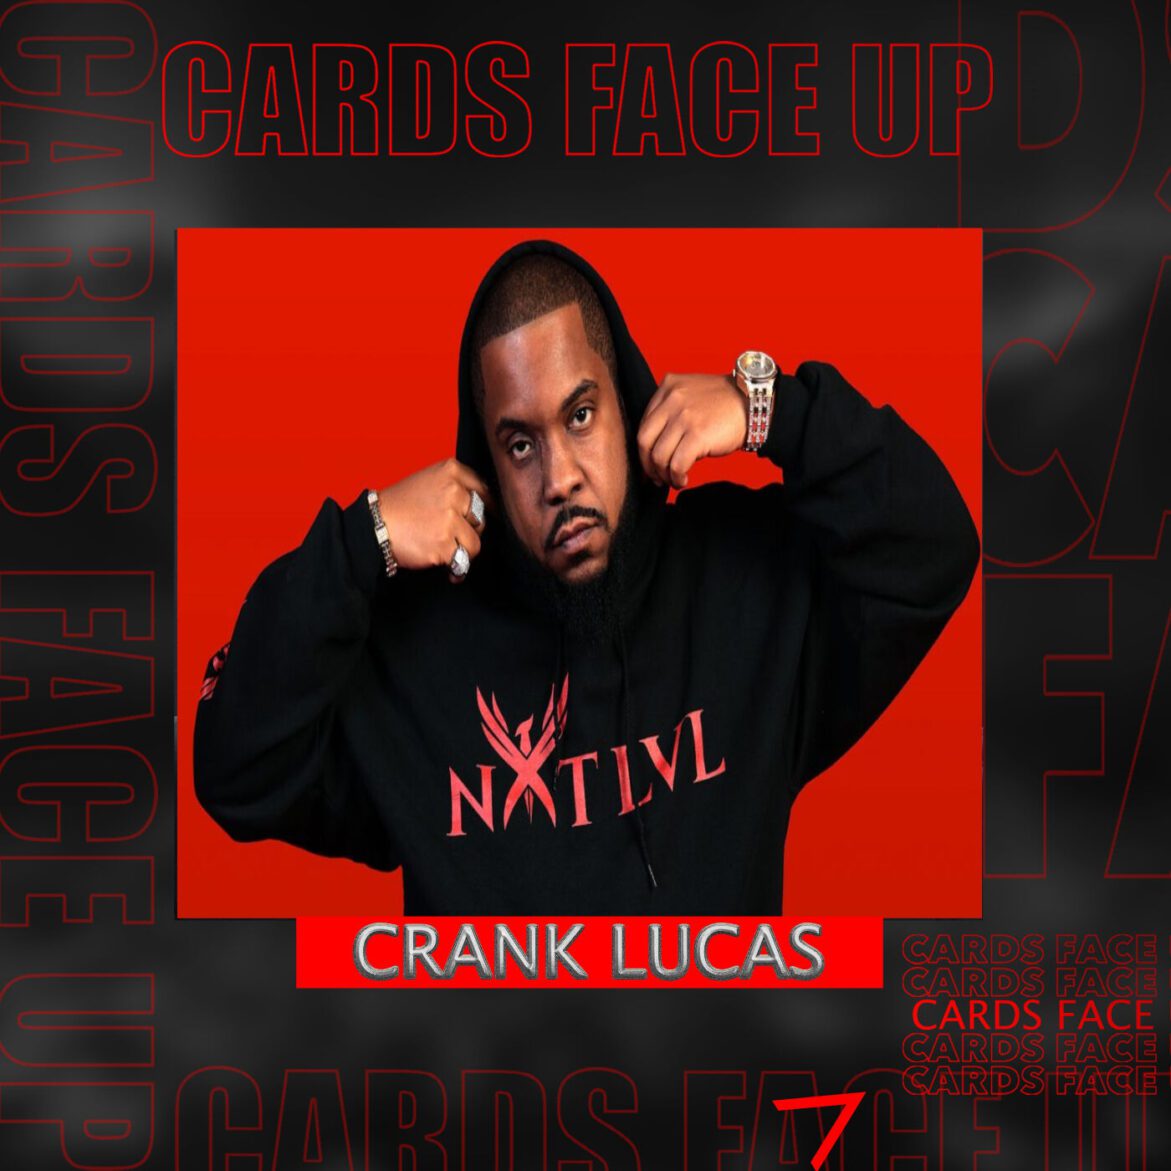 Black Podcasting - Crank Lucas Speaks On His Stardom | Beefing Over Skits | Copy Cats | Jay Z Vs Lil Wayne And More